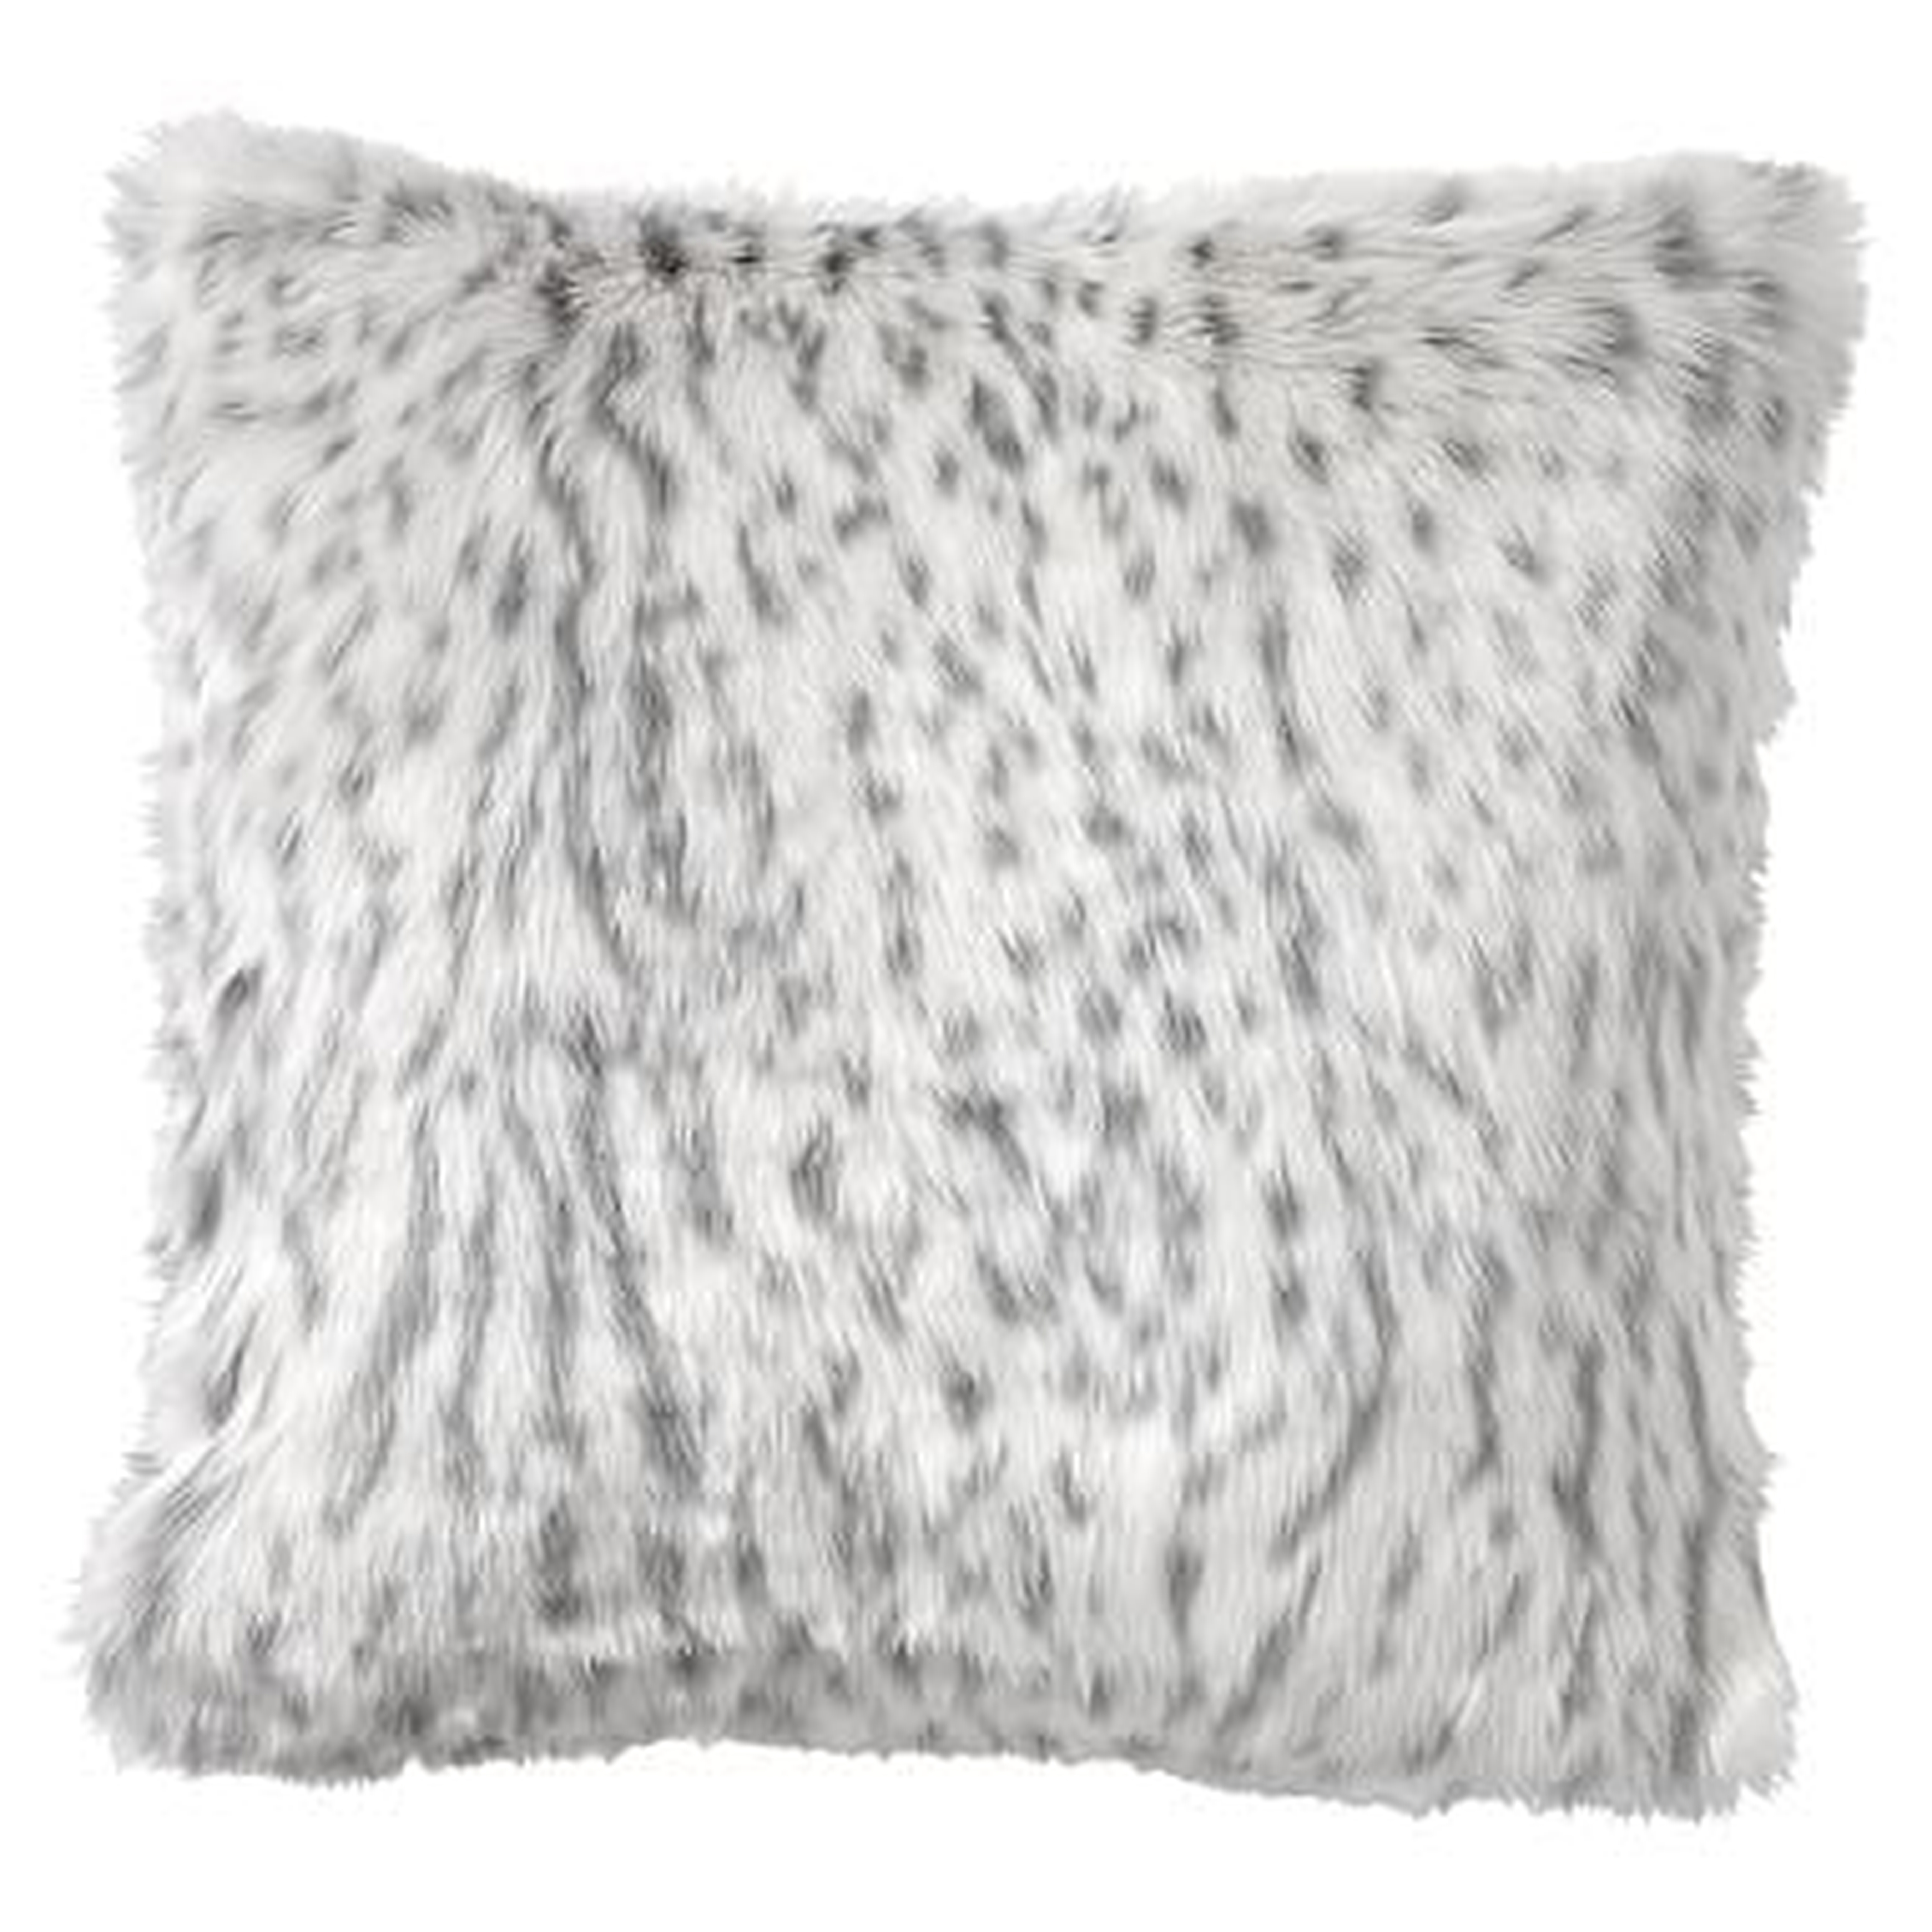 Faux-Fur Pillow Cover, 18 x 18", Gray Leopard - Pottery Barn Teen